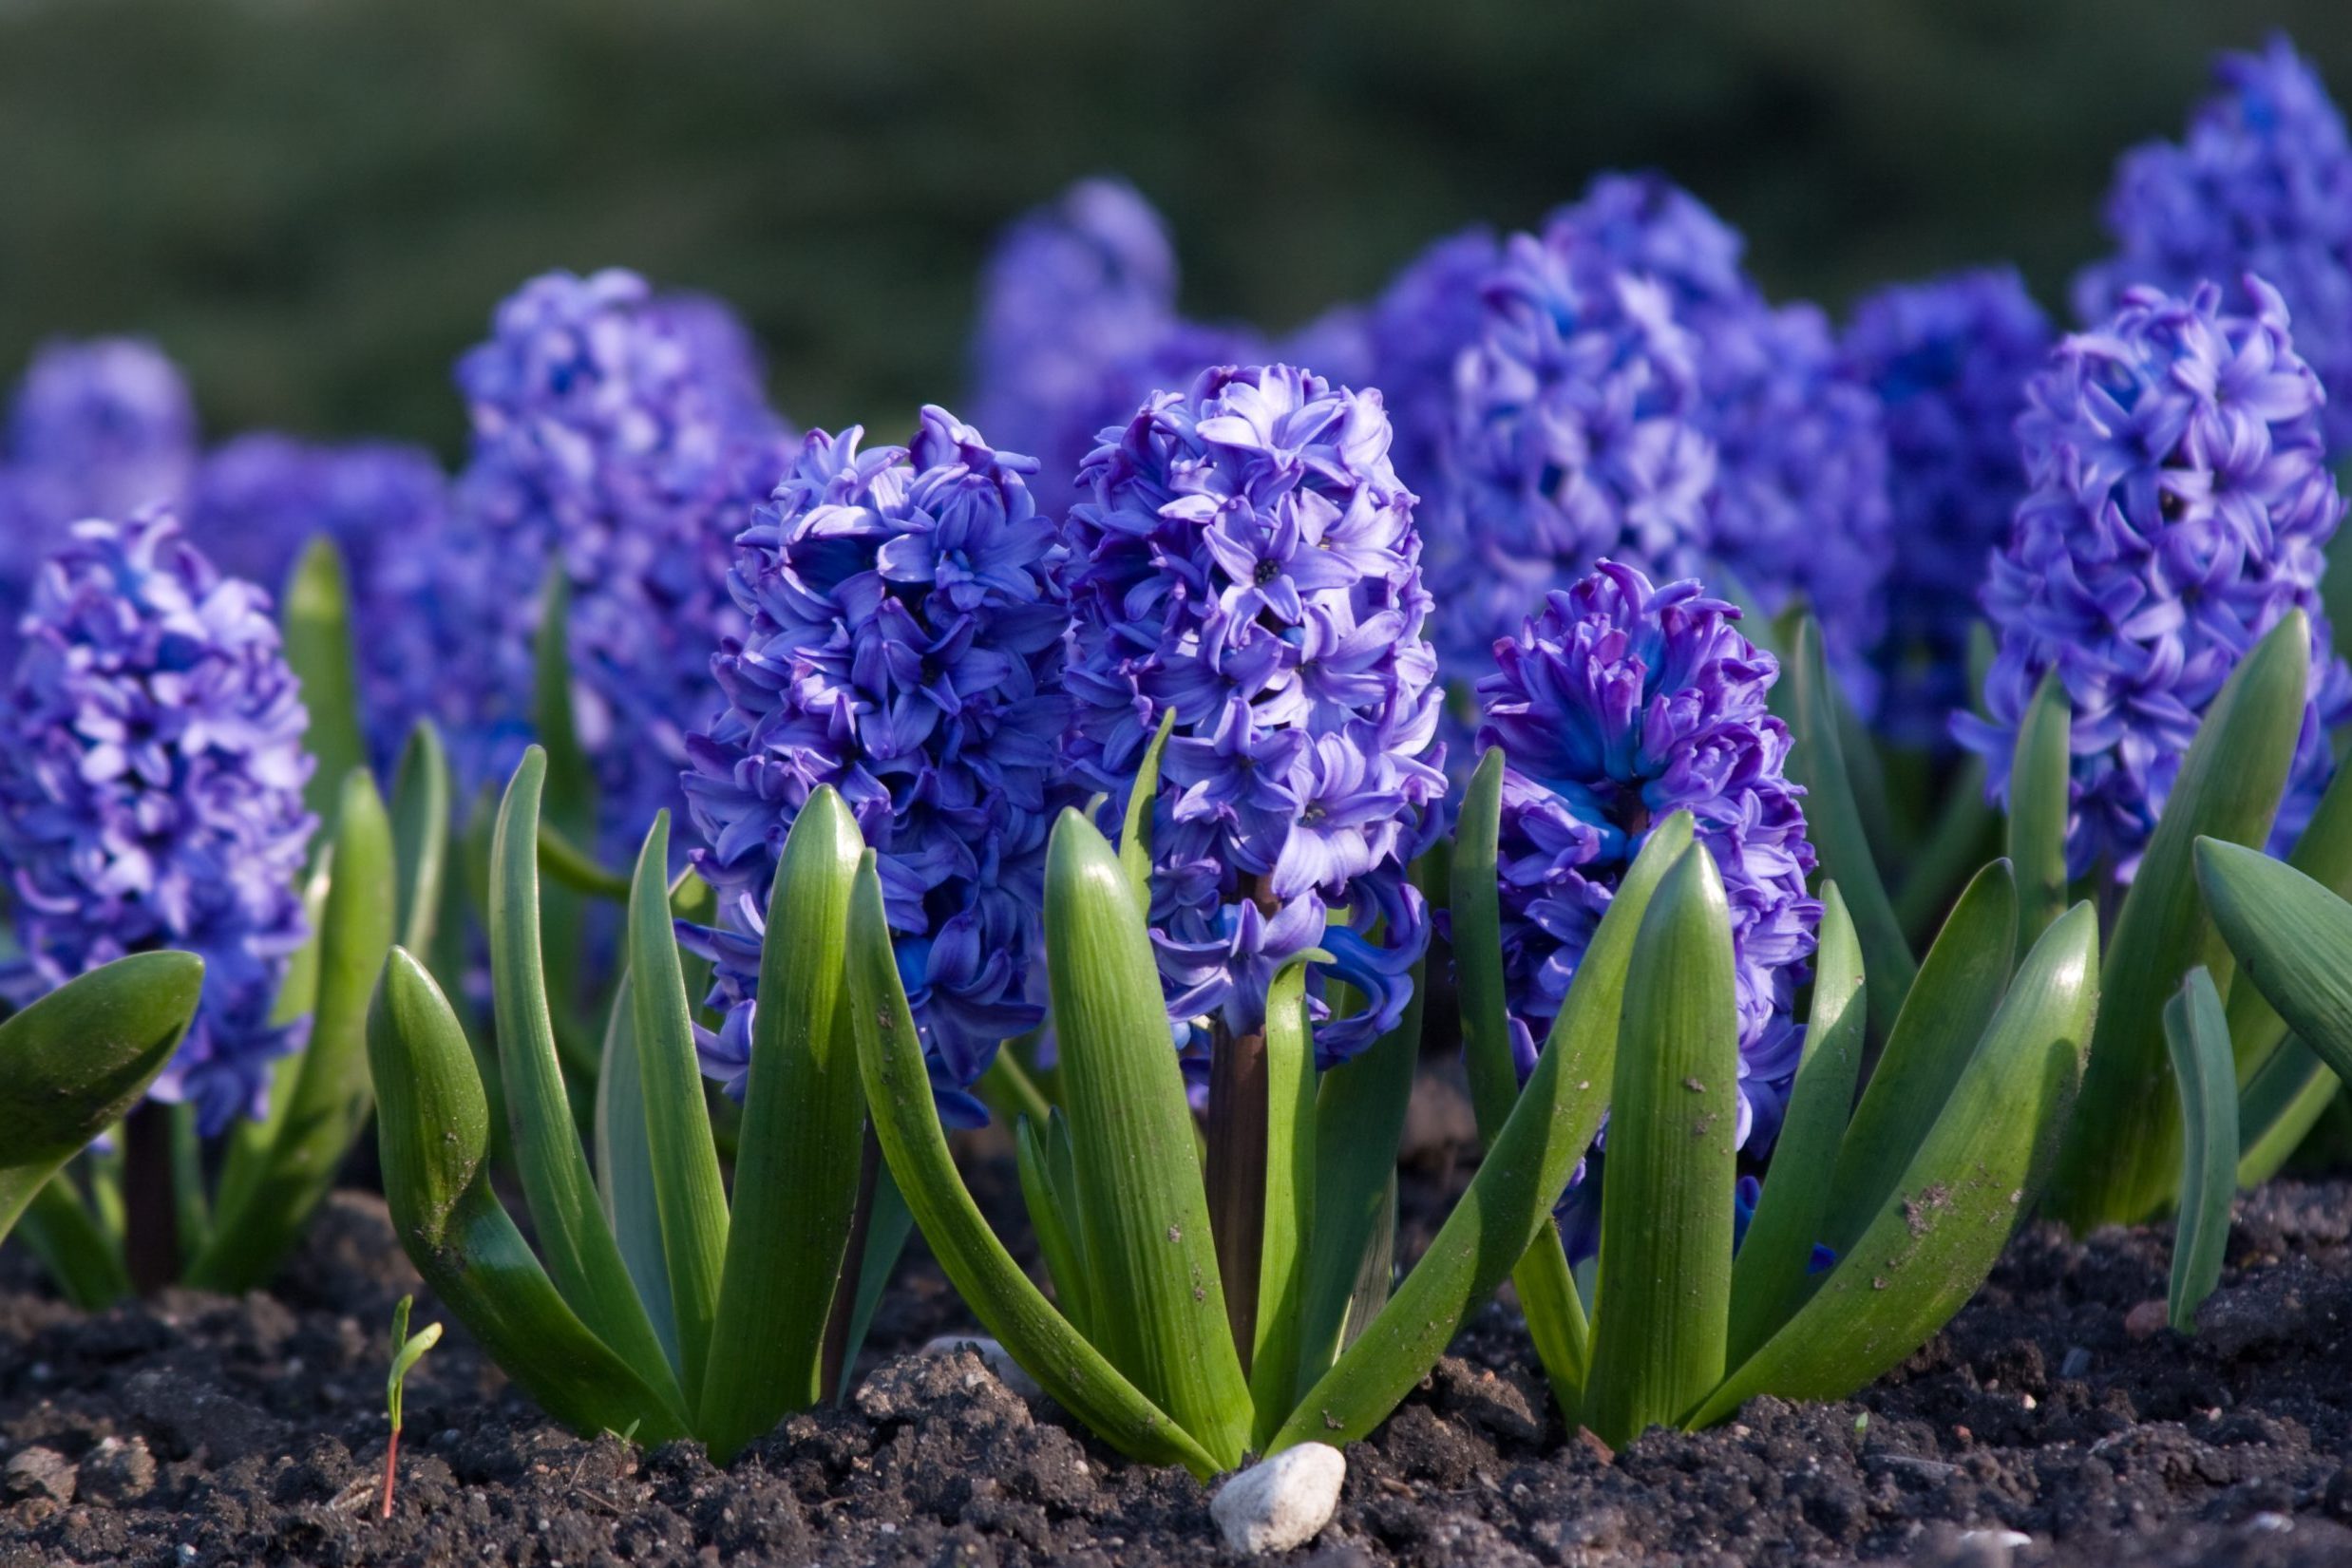 Guide To Growing and Forcing Hyacinth Bulbs